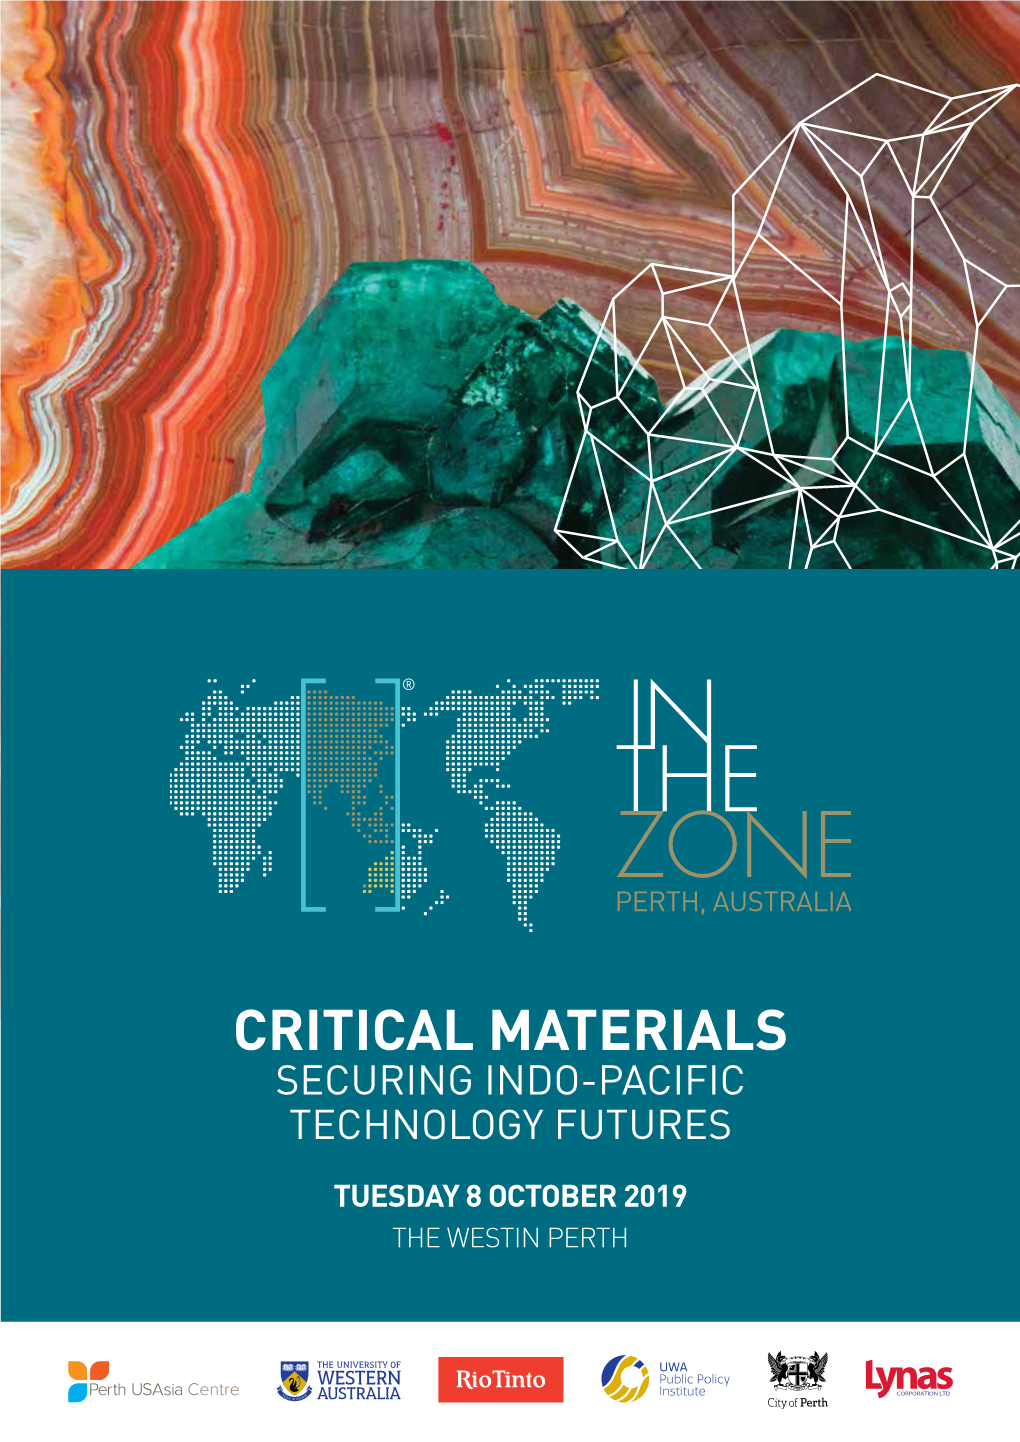 Critical Materials Securing Indo-Pacific Technology Futures